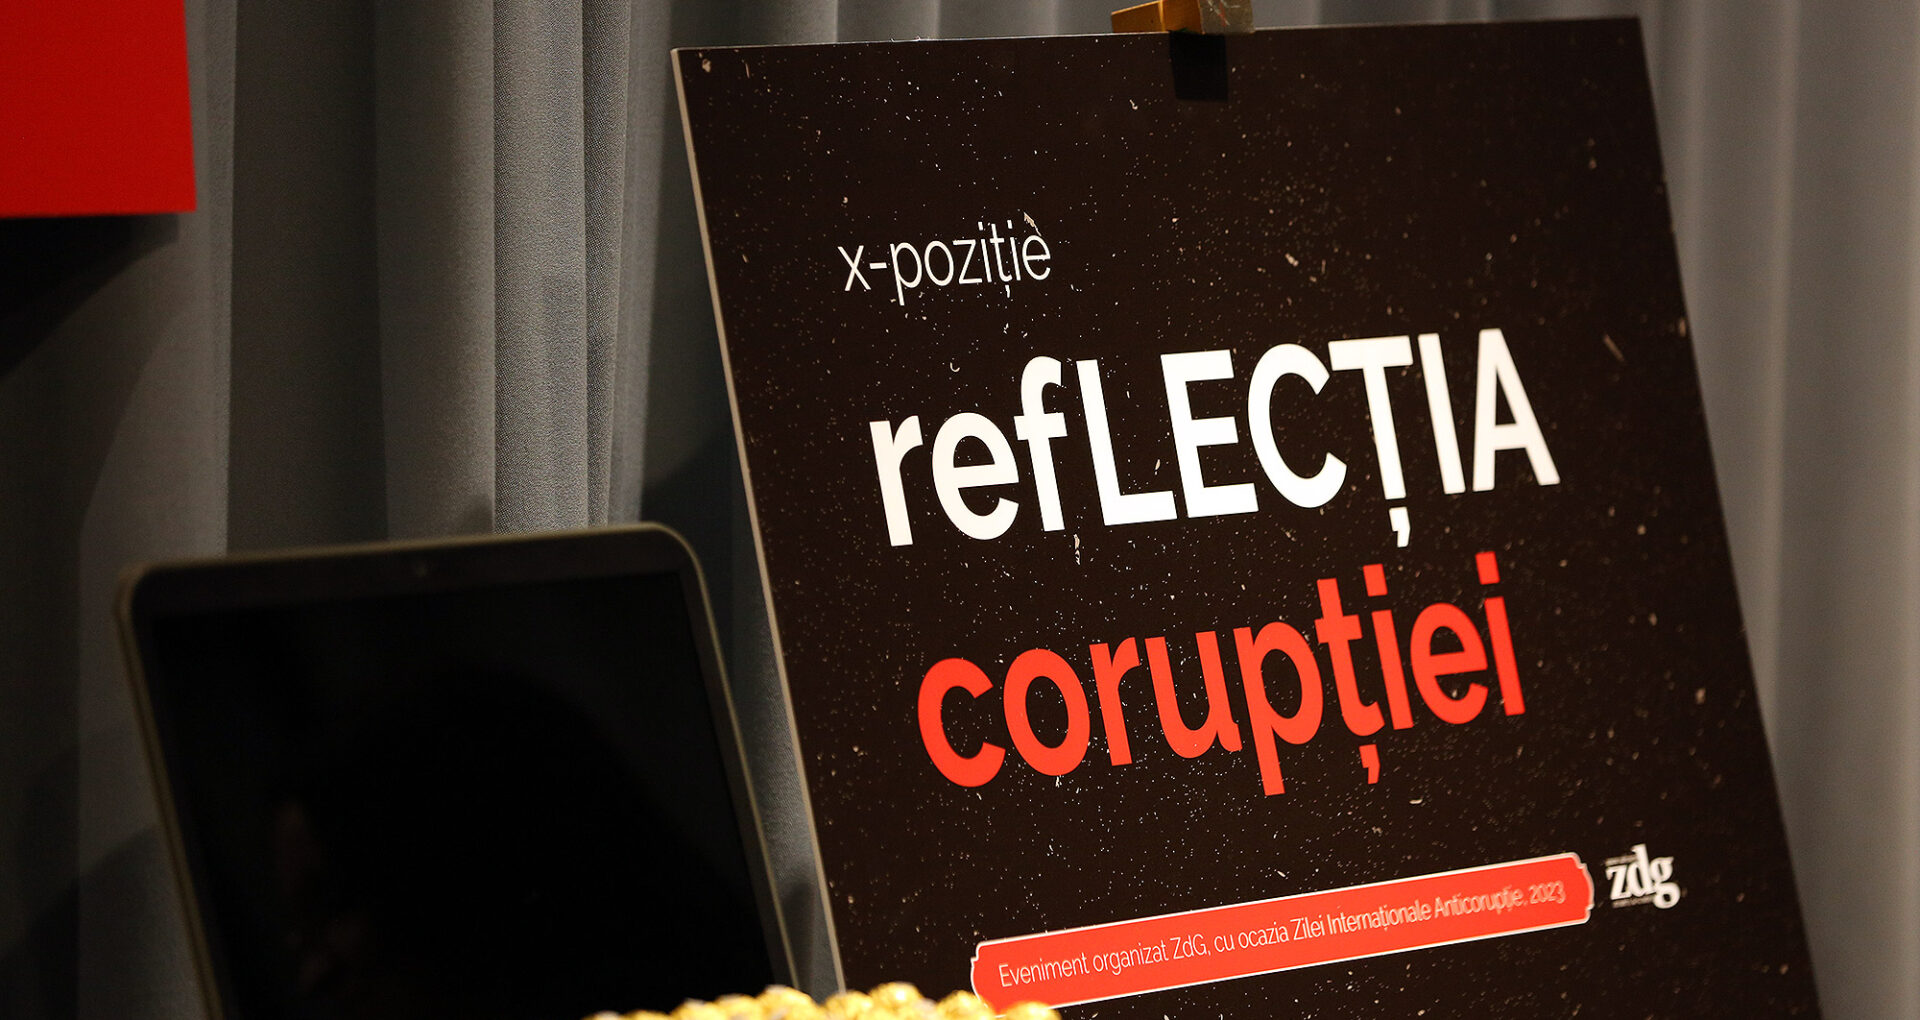 RefLECTION of Corruption — the ZdG event revealing the year’s corruption cases, the efforts of investigative journalists, and the impact of their work